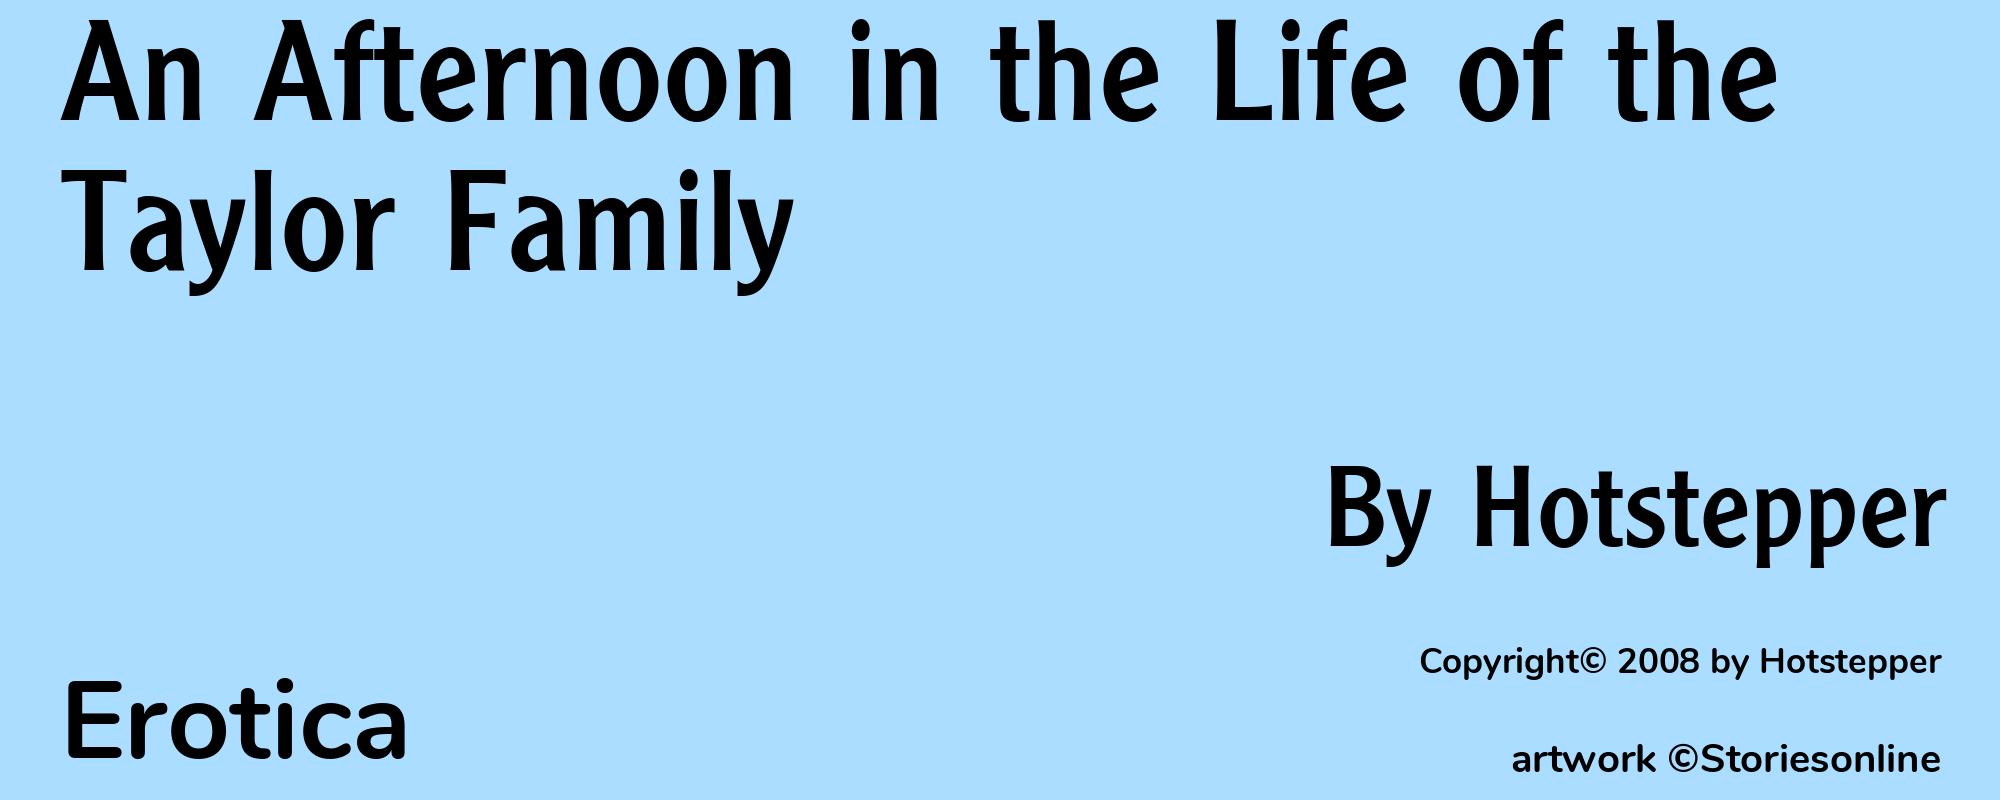 An Afternoon in the Life of the Taylor Family - Cover